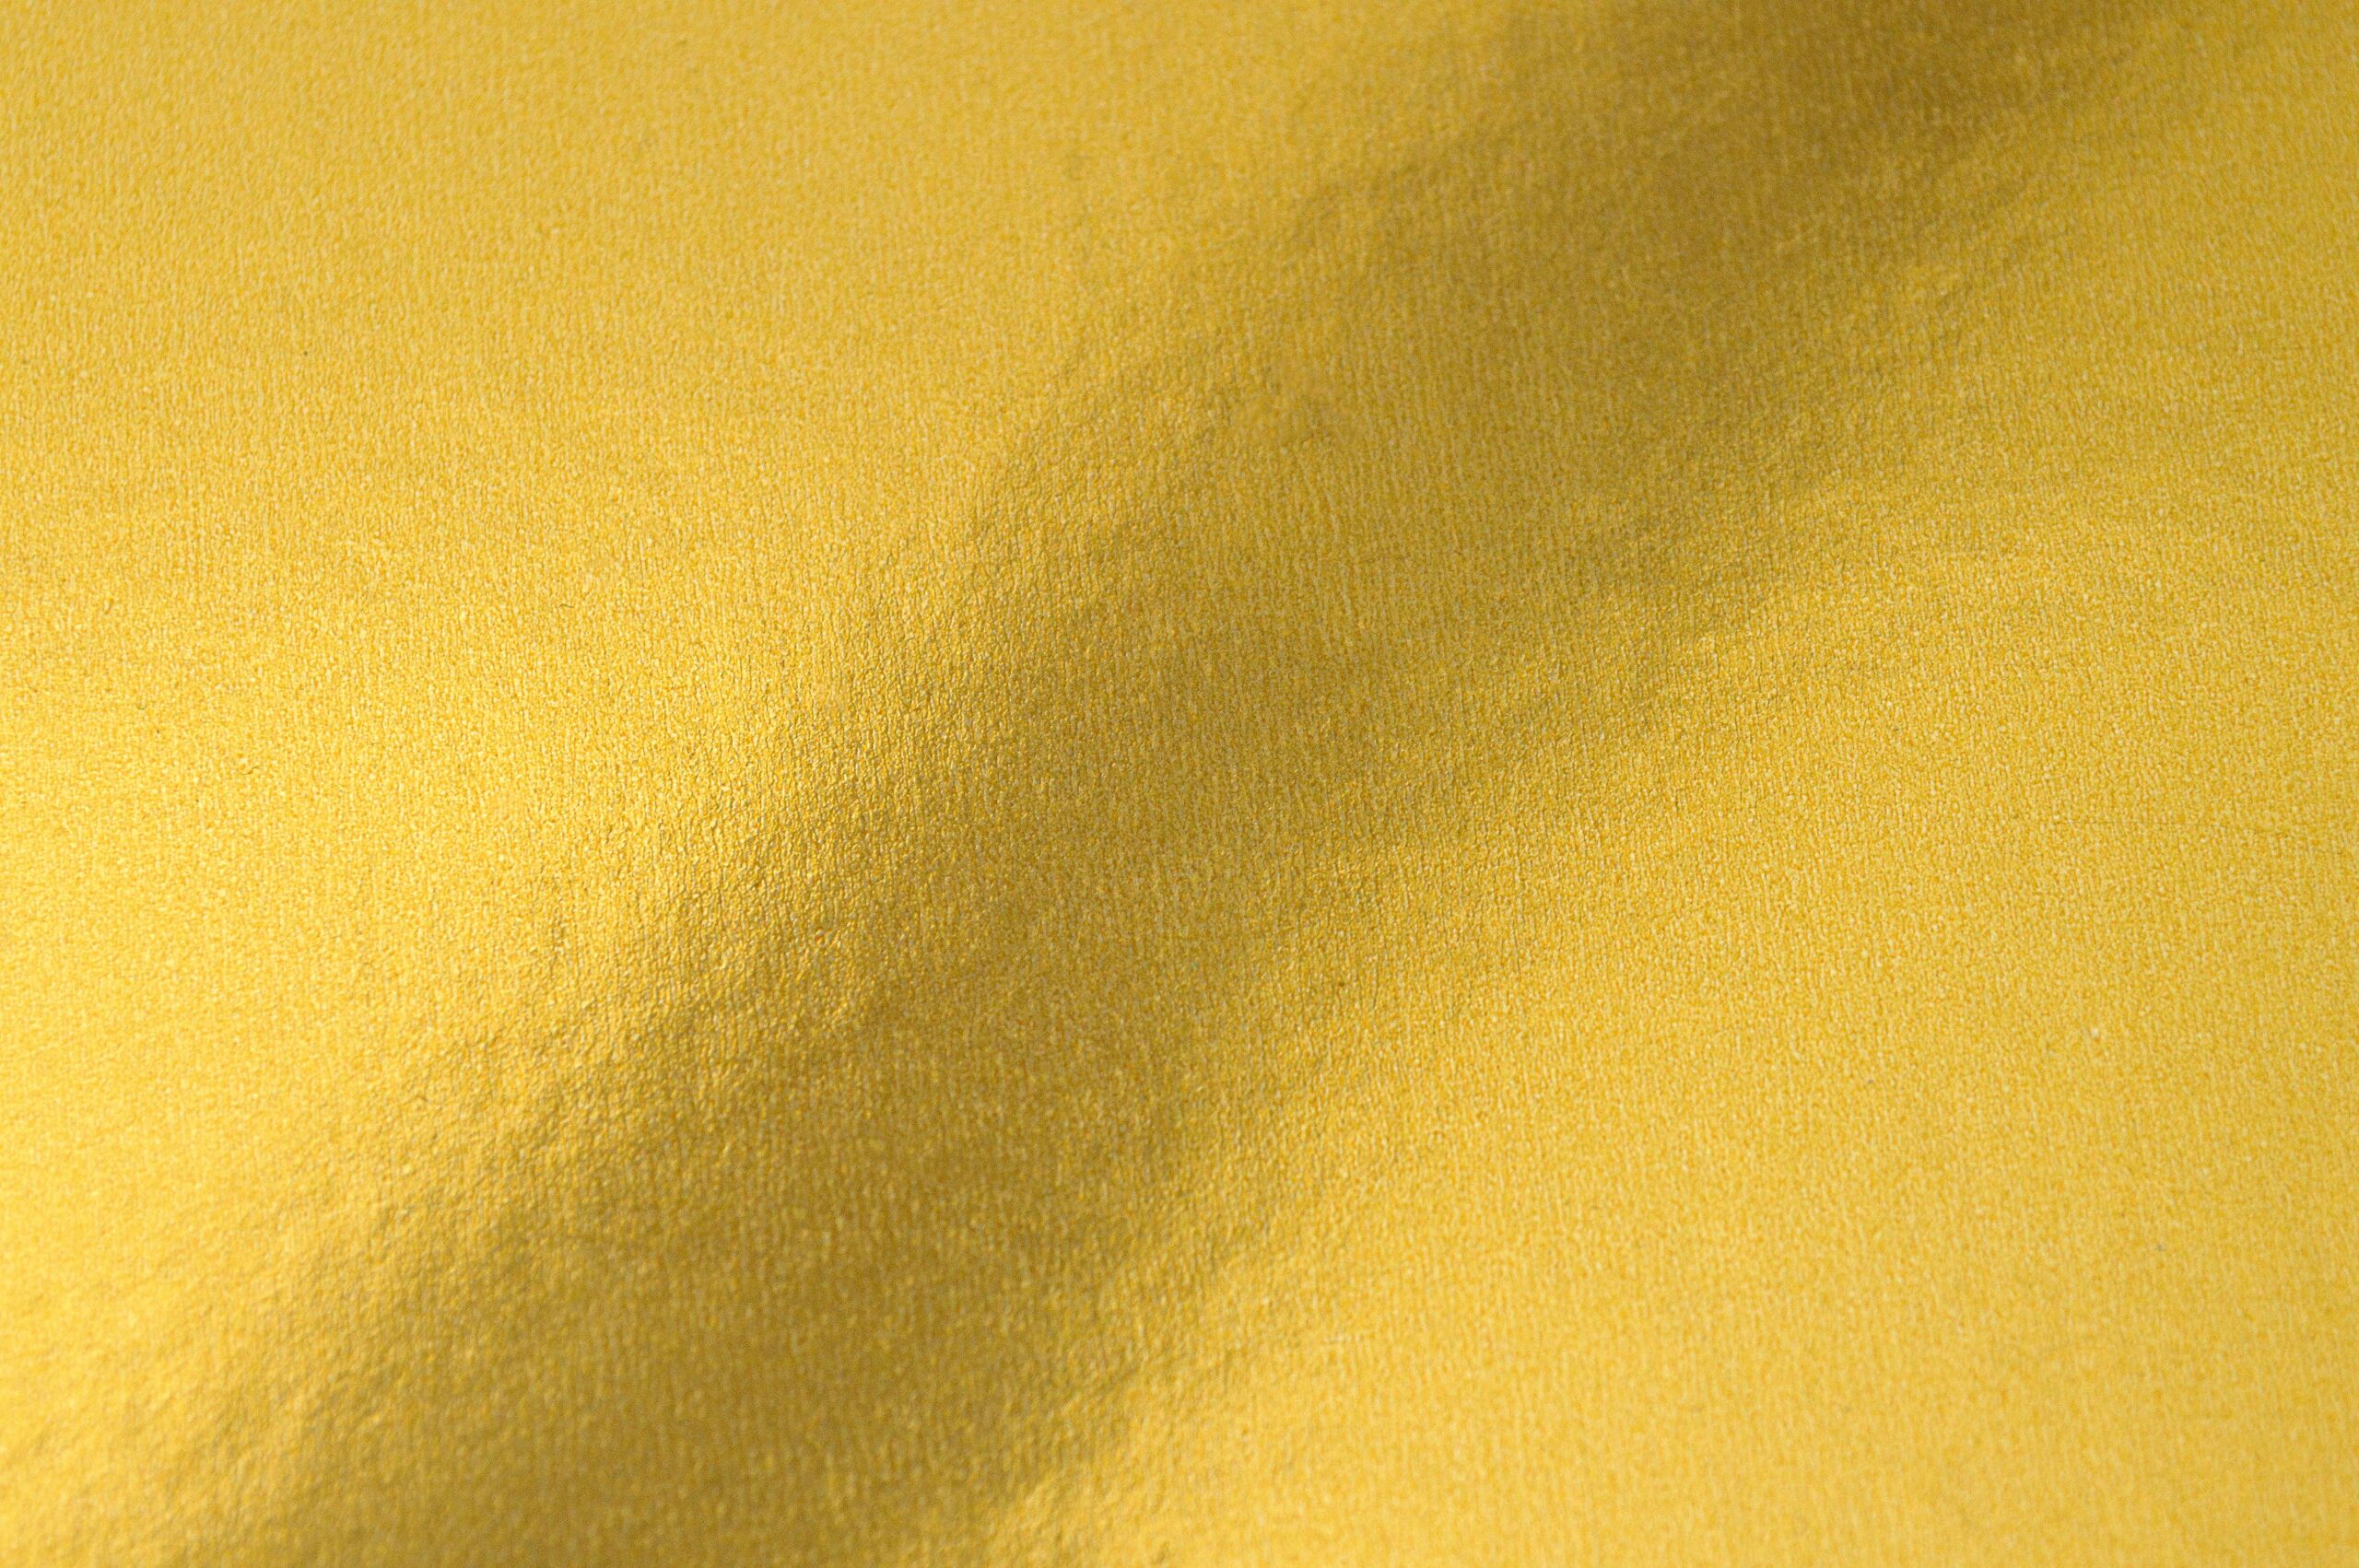 A gold background